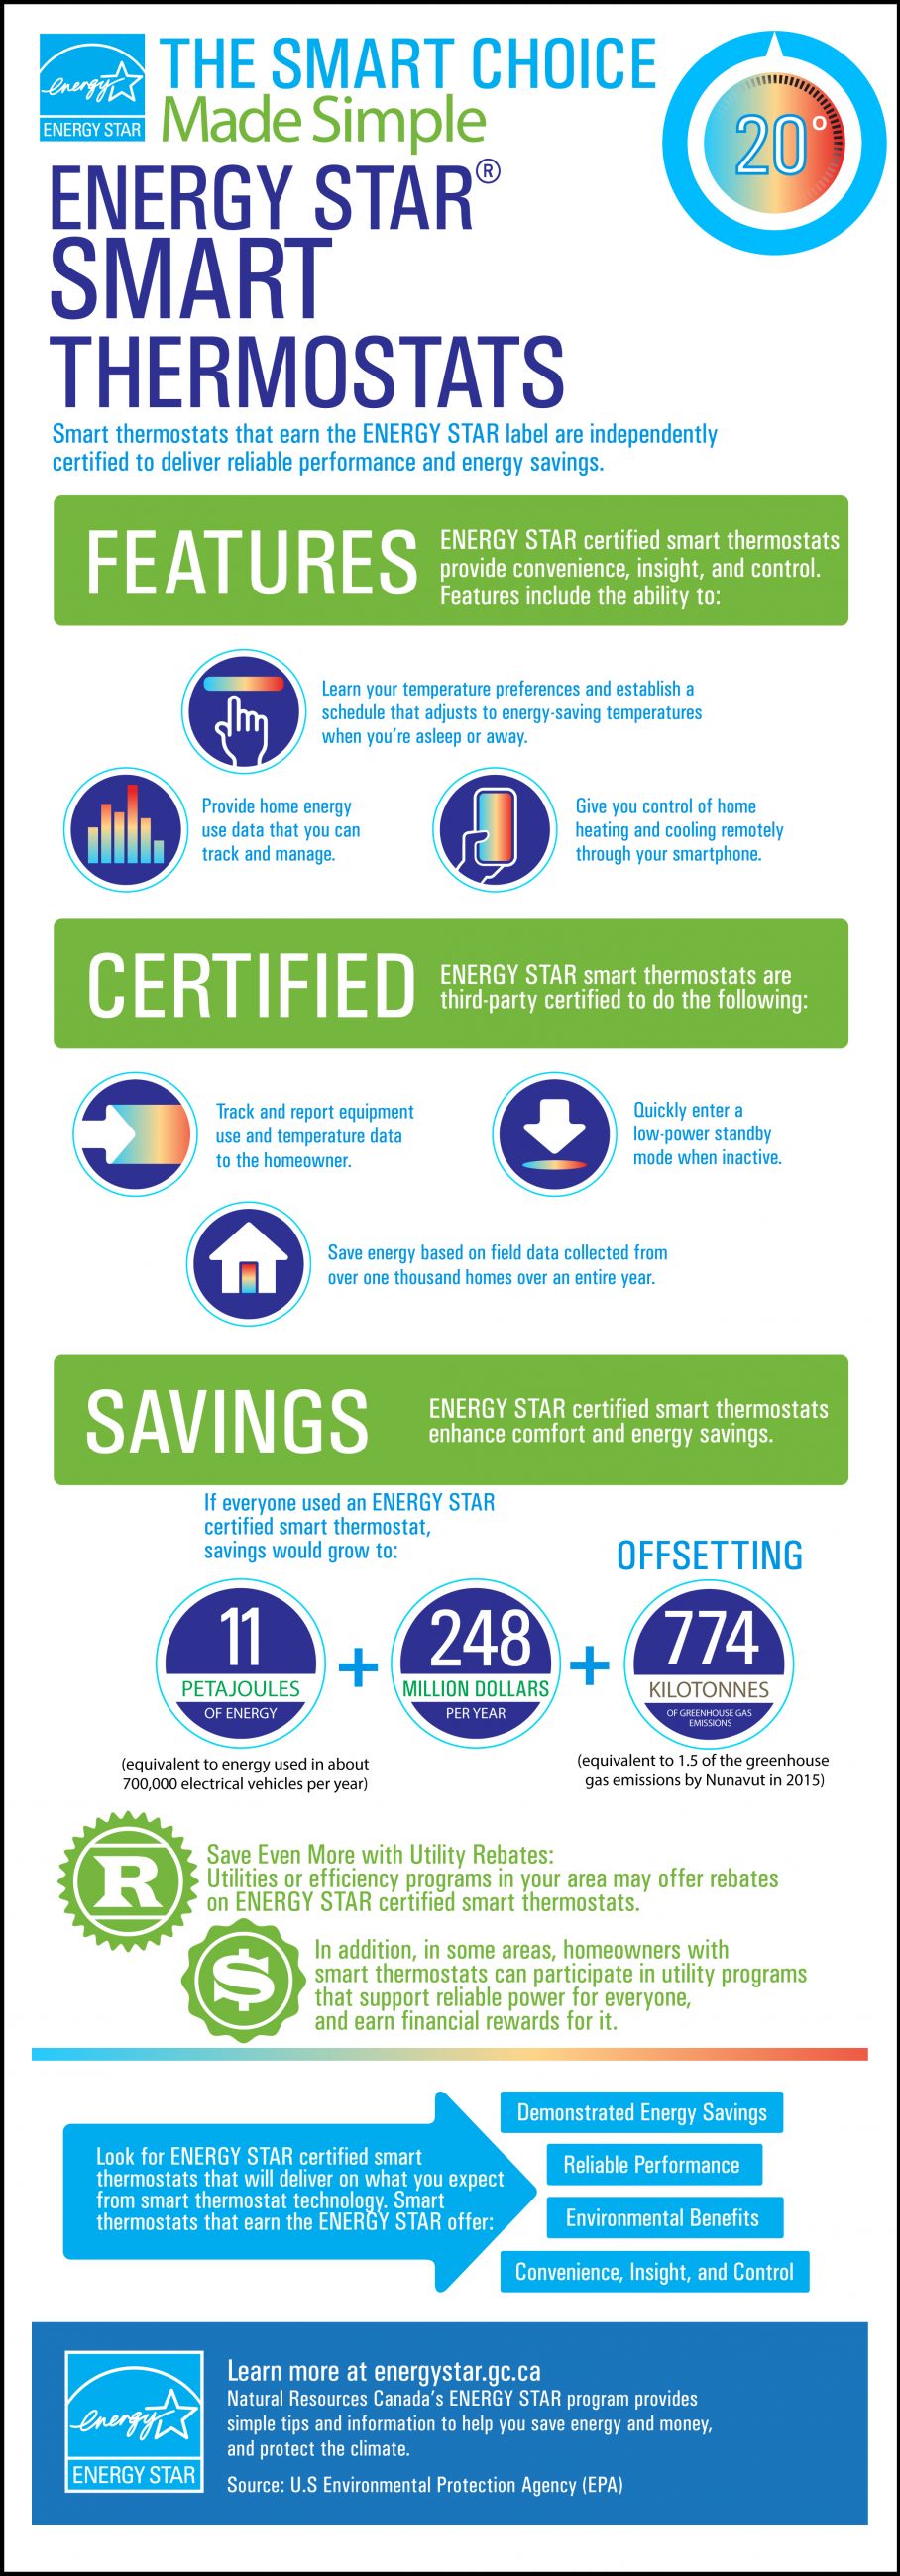 The Smart Choice Made Simple: ENERGY STAR® Smart Thermostats, described below.